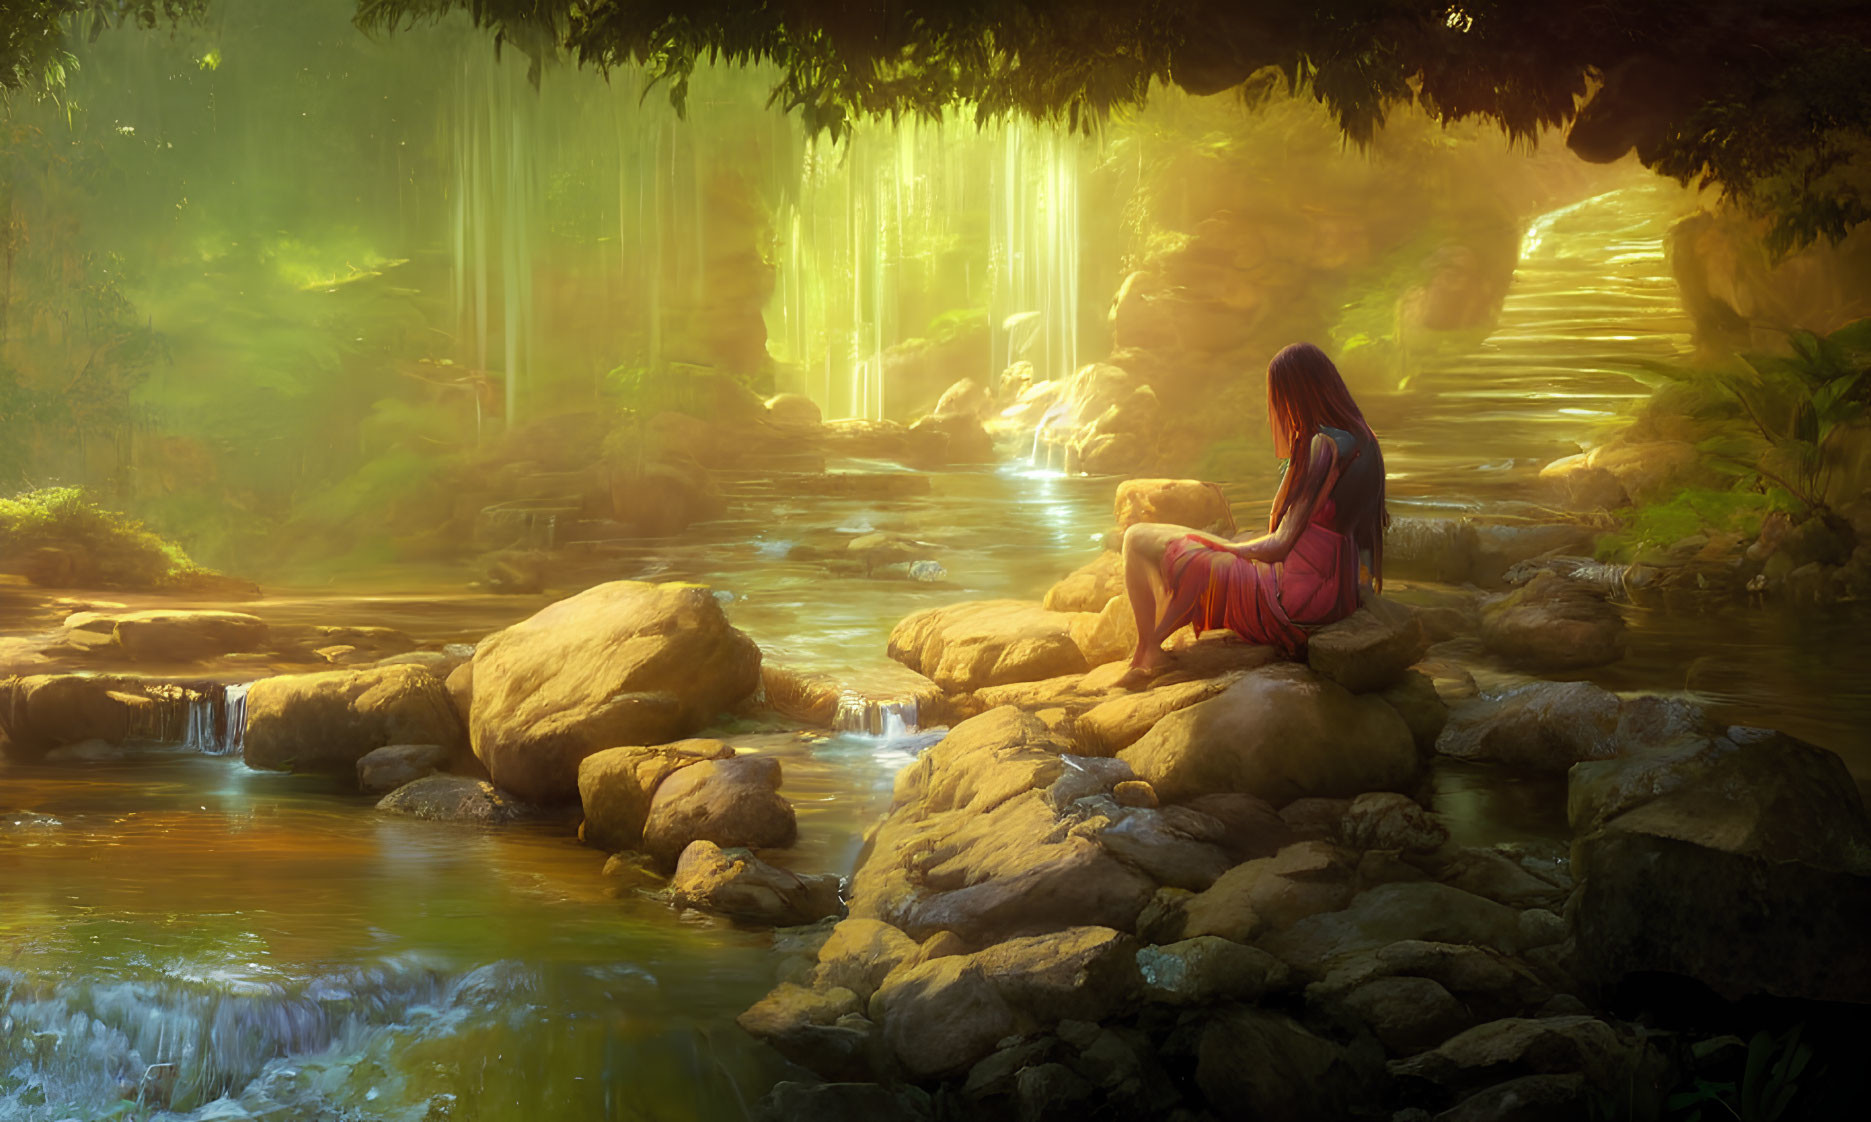 Woman in Red Dress Sitting by Stream Surrounded by Nature